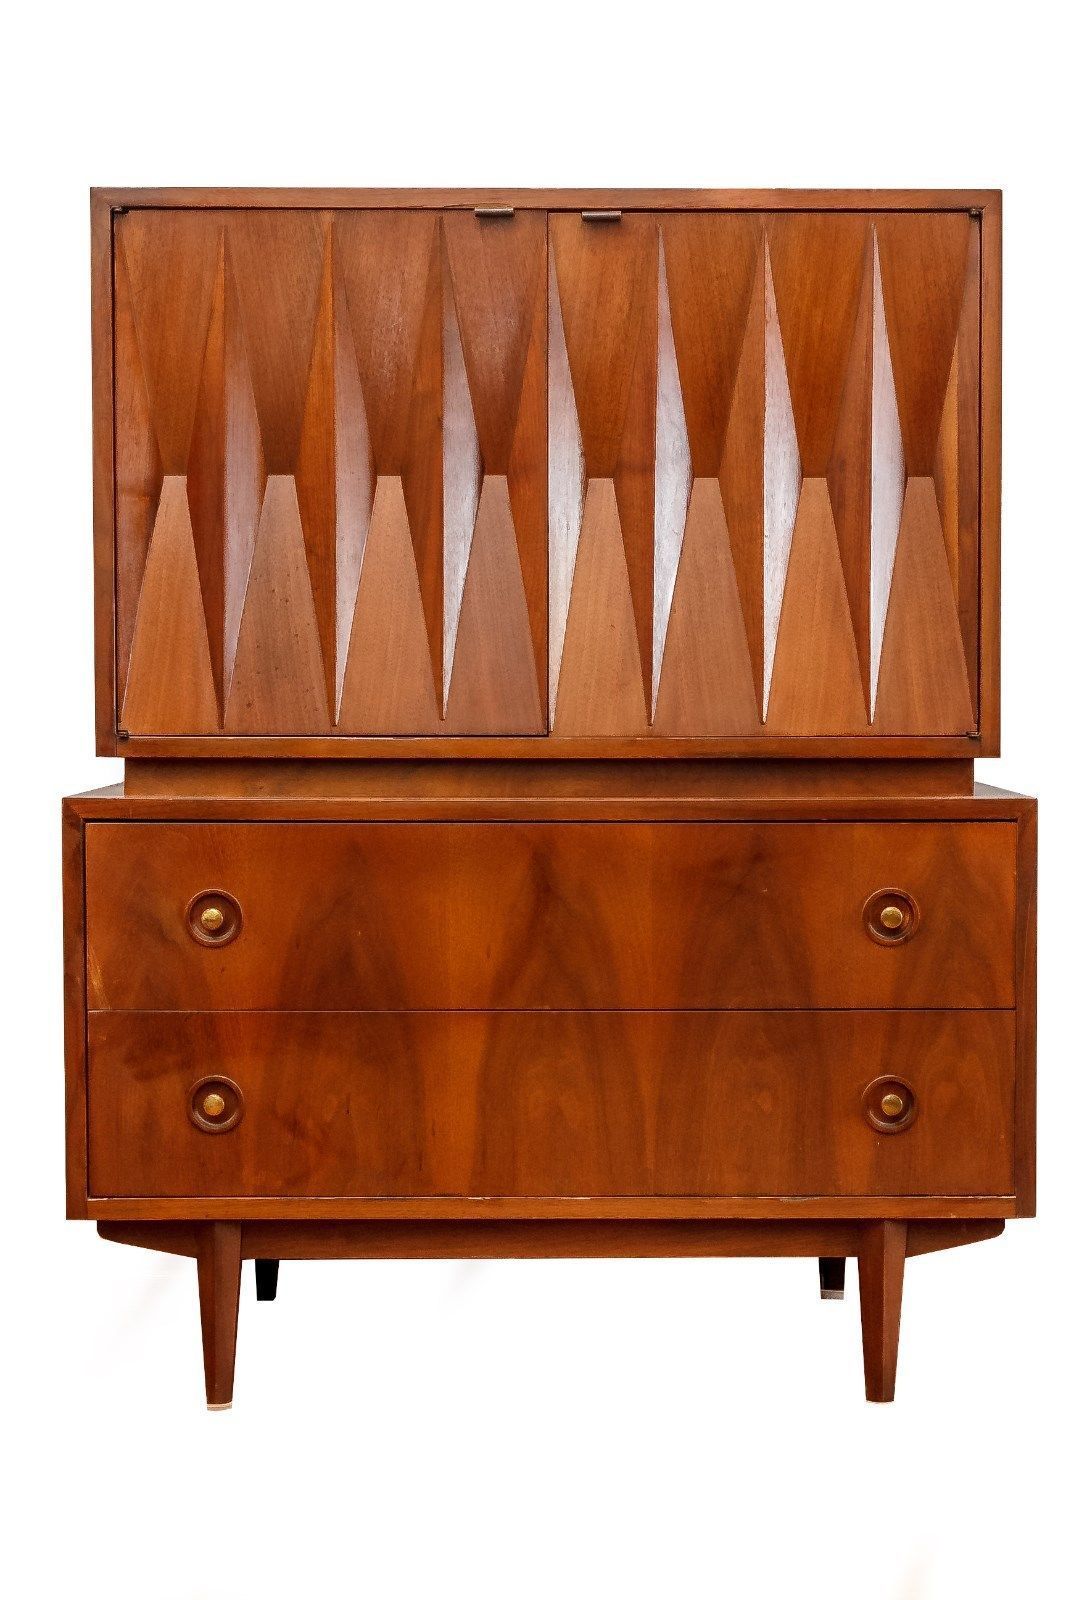 Albert Parvin Attributed; Walnut Cabinetamerican Of Throughout Botanical Harmony Credenzas (View 14 of 30)